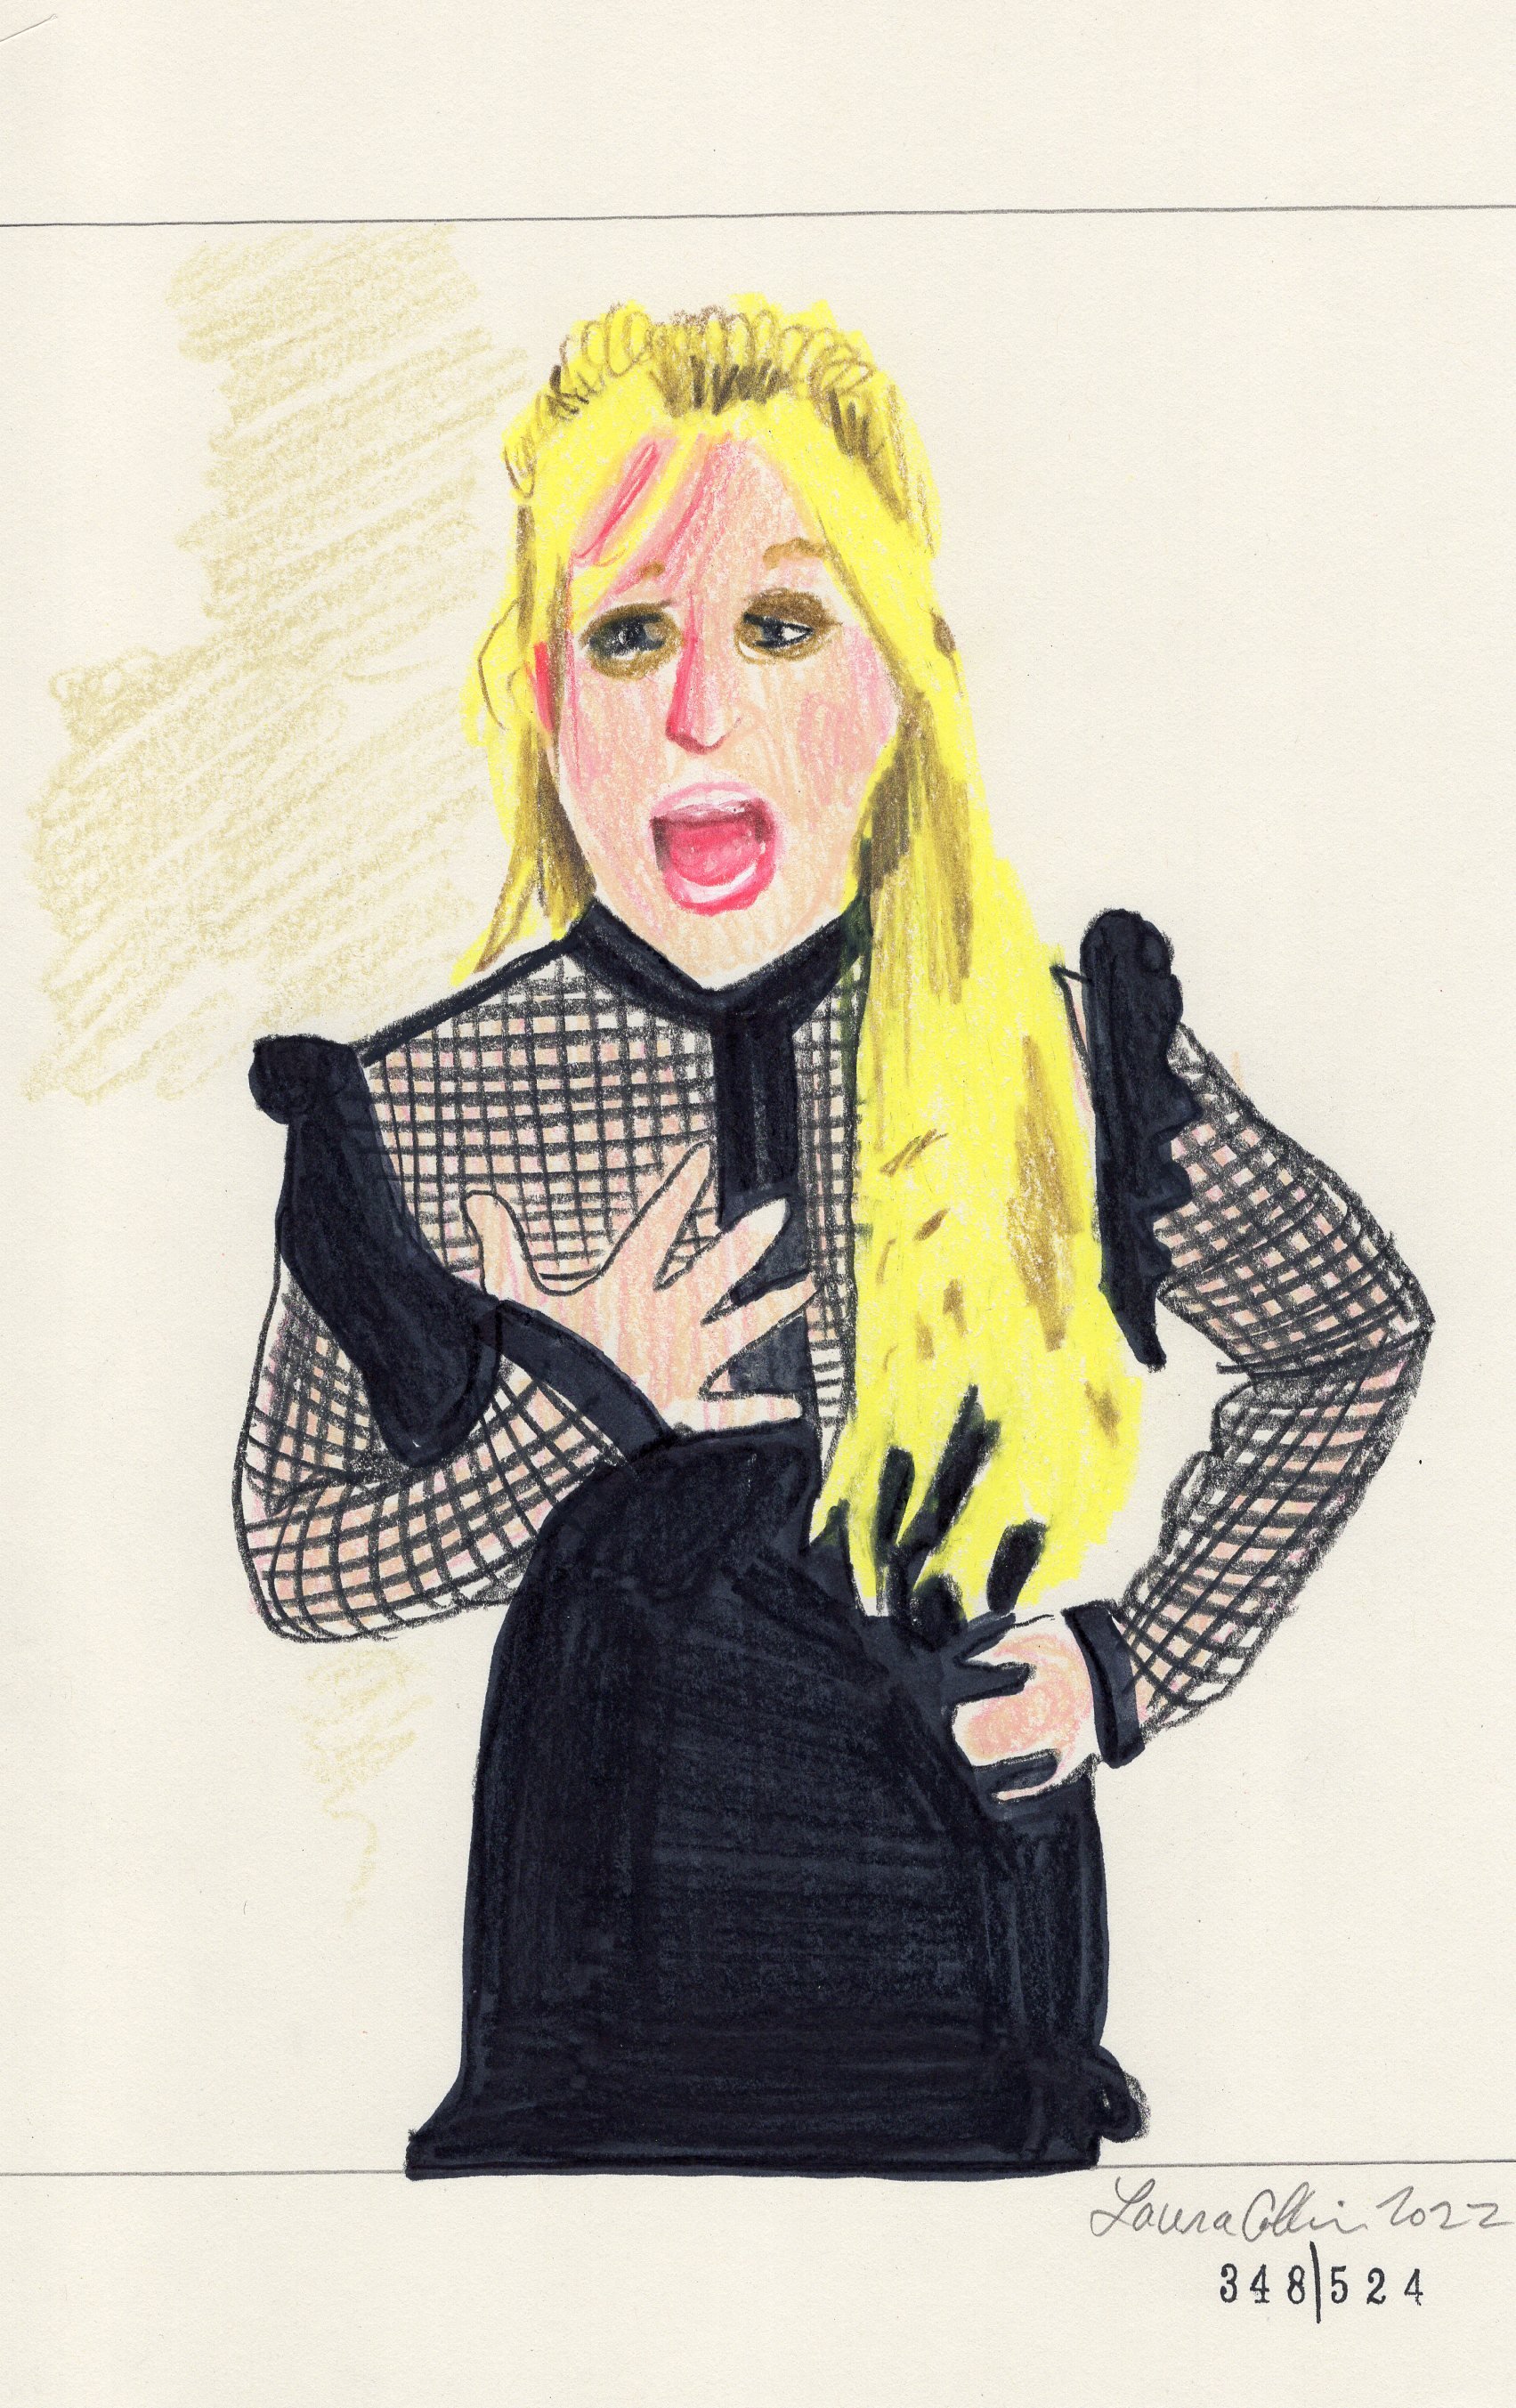 Laura Collins Britney Spears Animation 6x9in mixed media 2022 no348.jpg